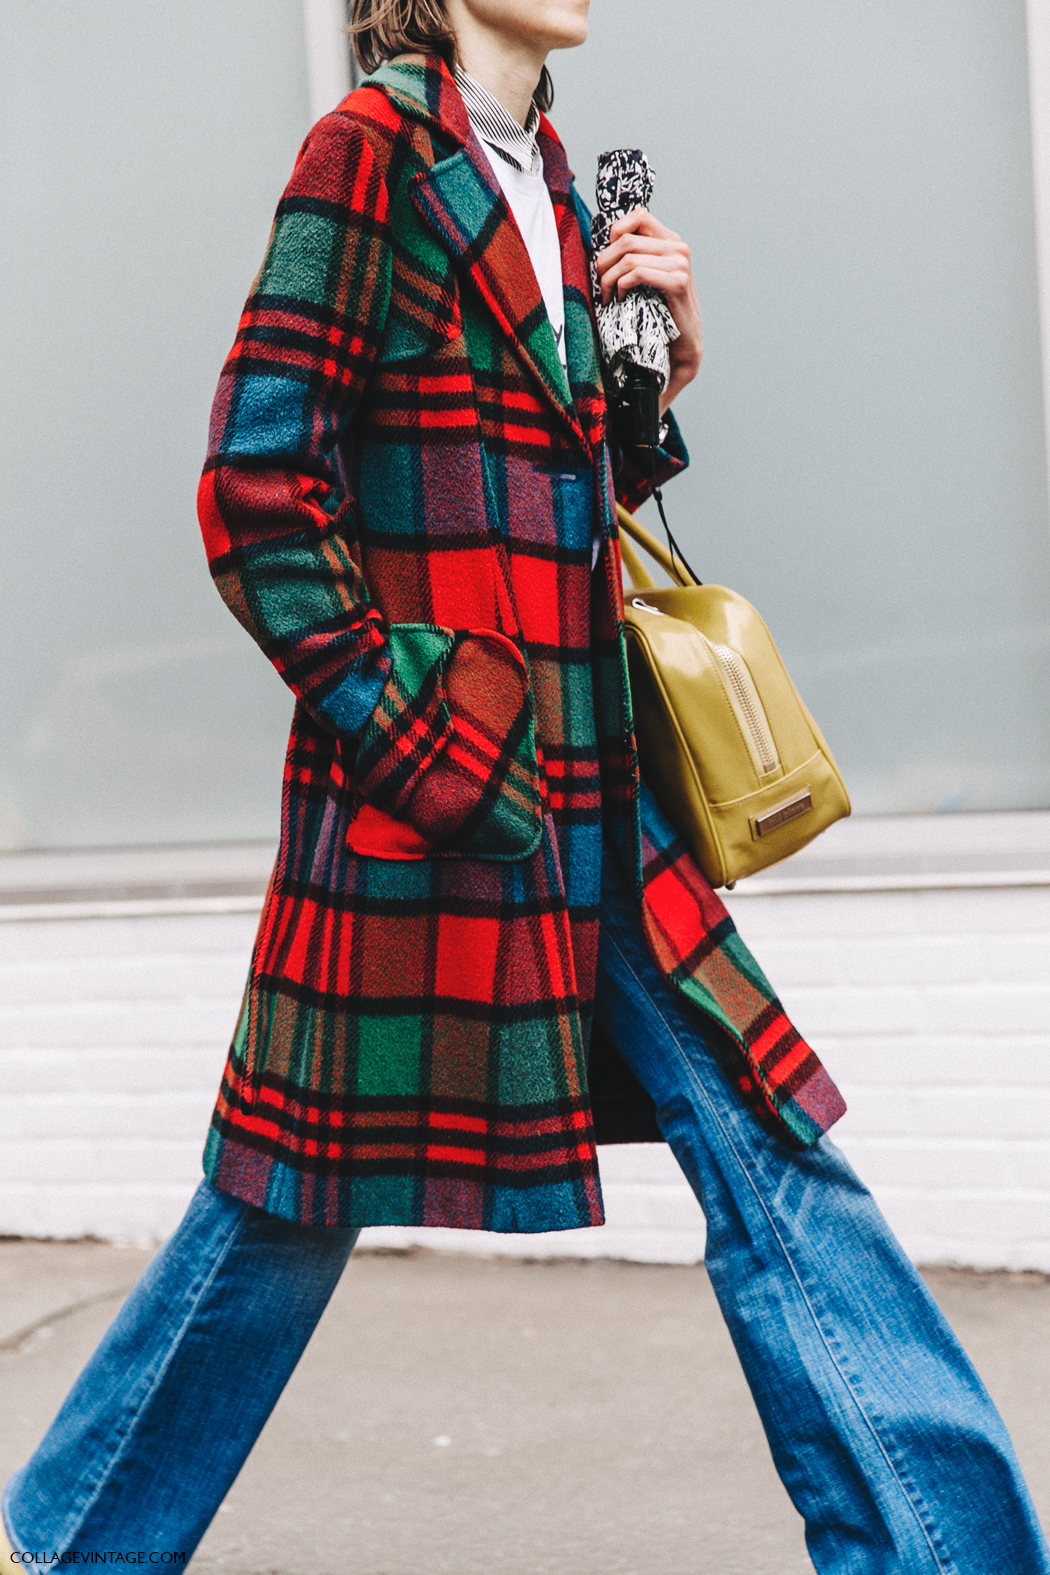 NYFW-New_York_Fashion_Week-Fall_Winter-17-Street_Style-Checked_Coat-Jeans-Yellow_bag-Yellow_Loafers-2